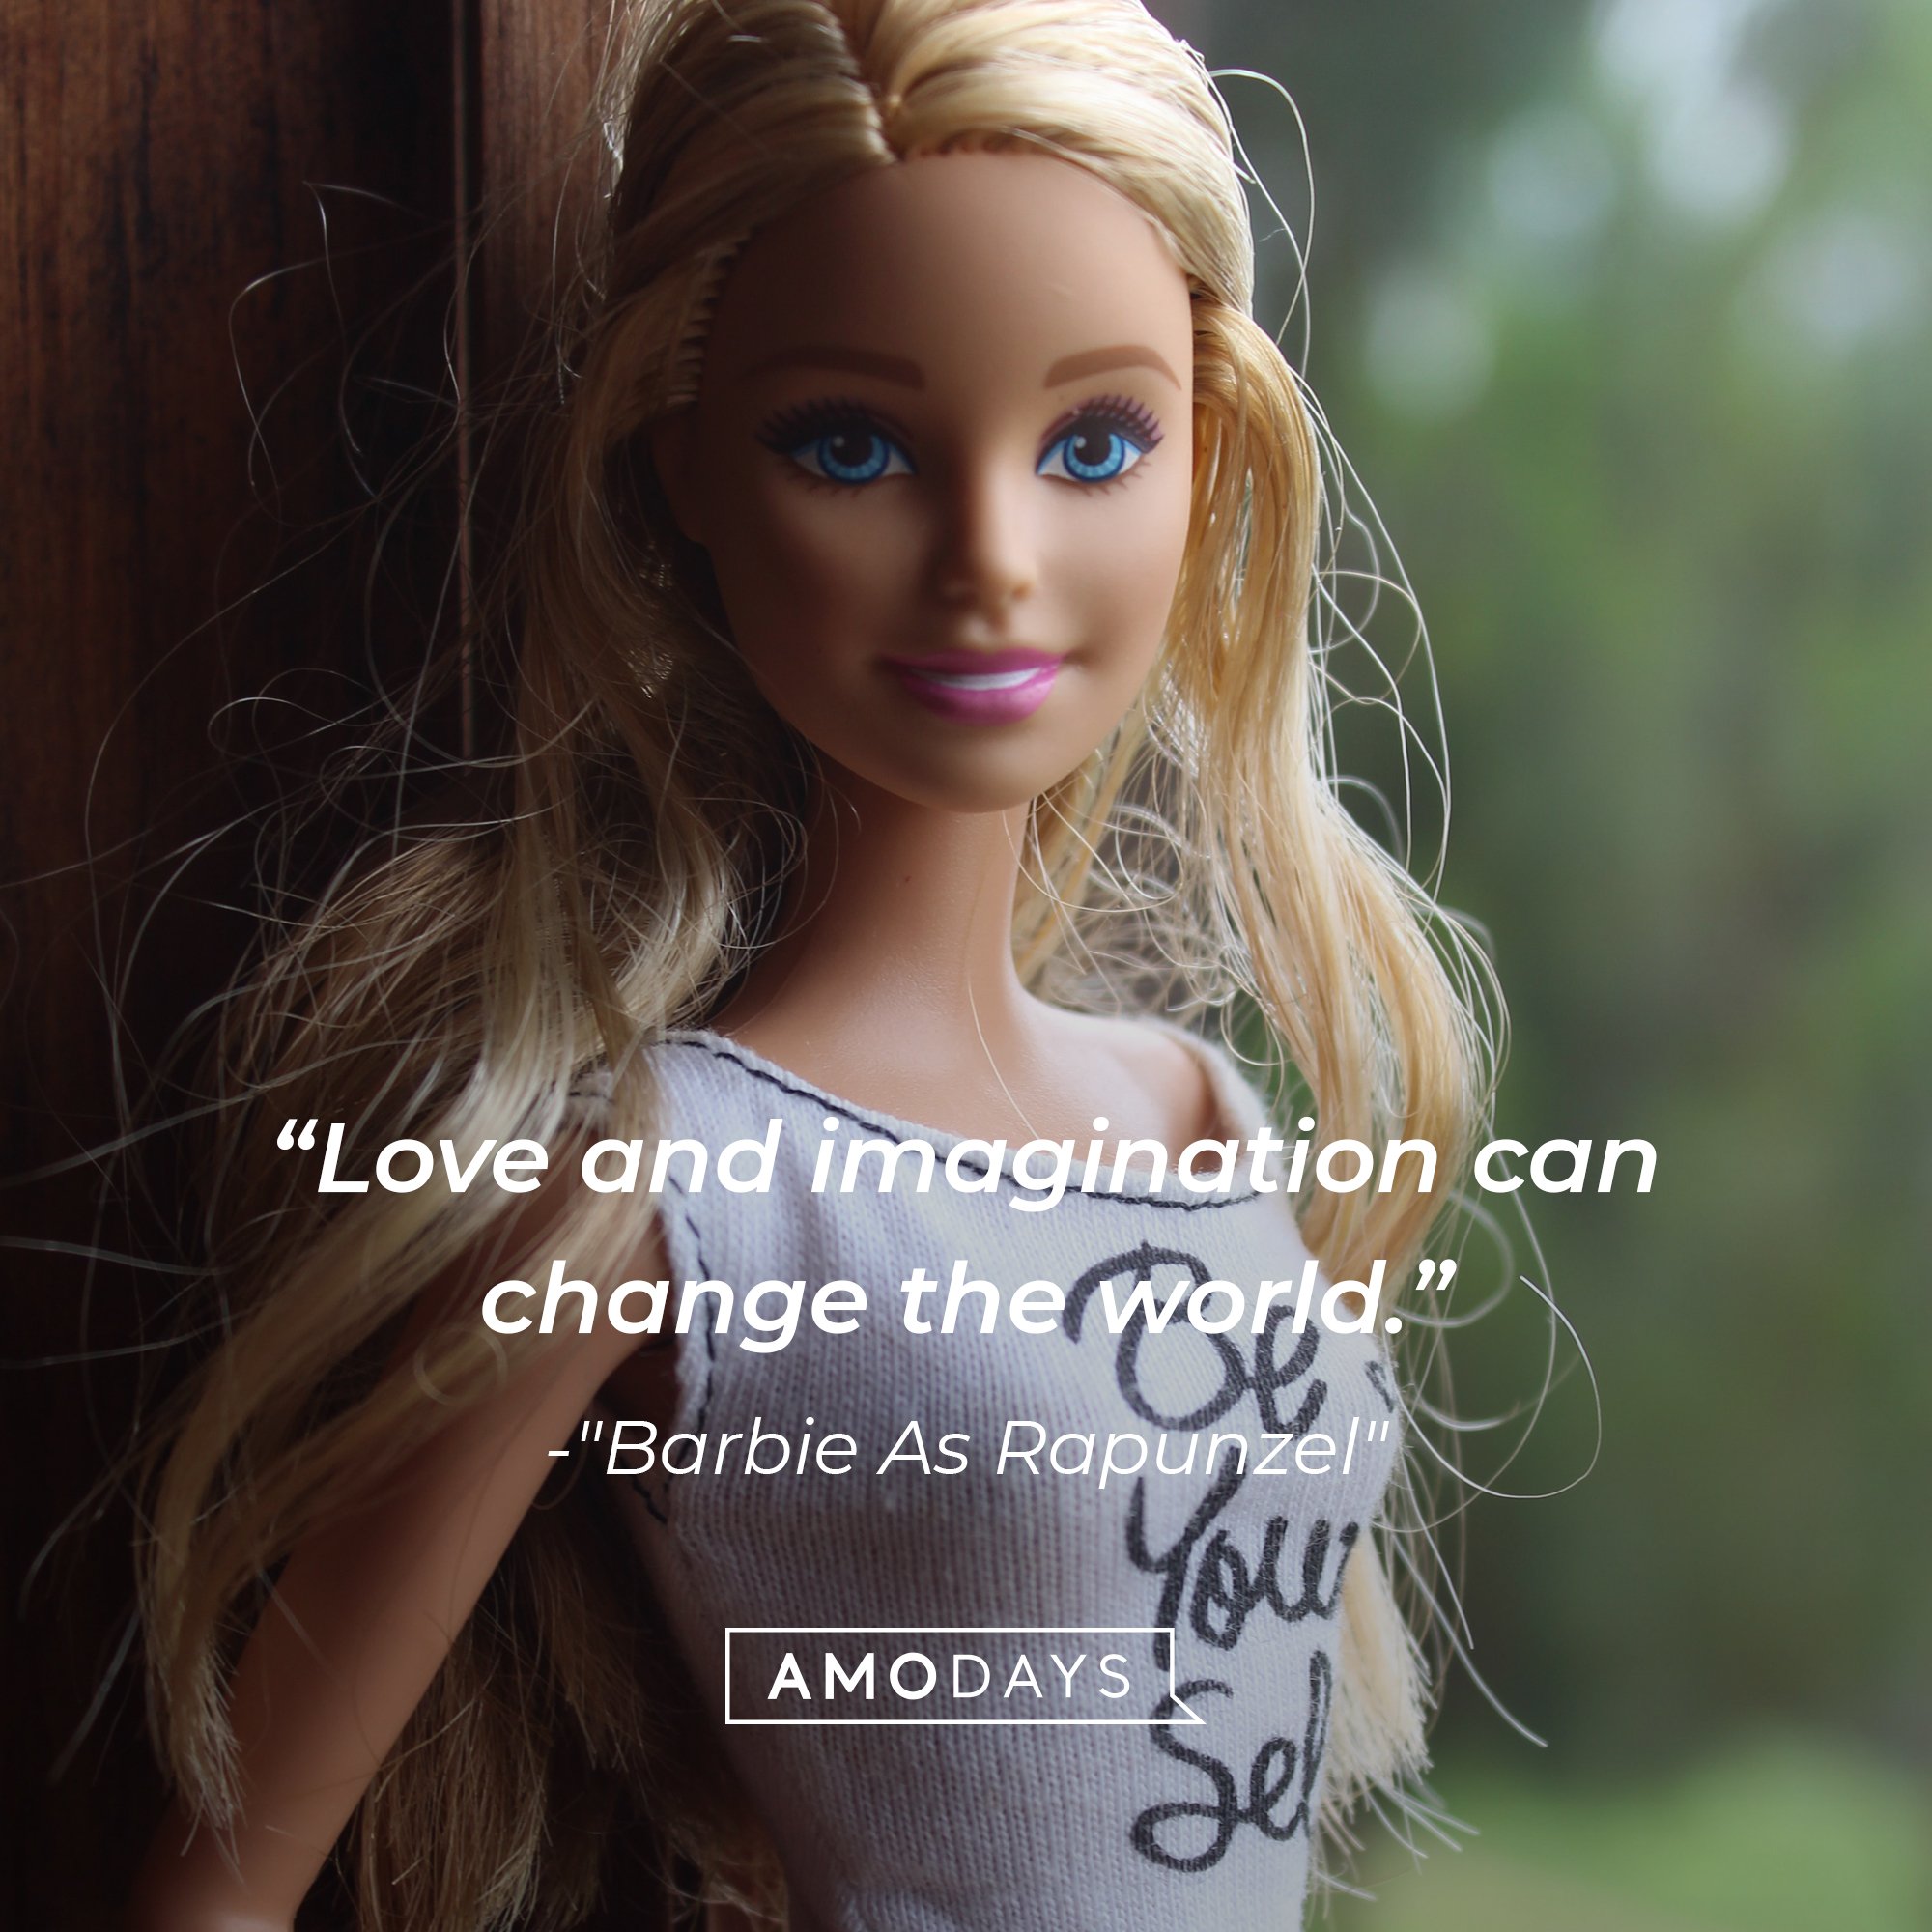 "Barbie As Rapunzel's" quote: "Love and imagination can change the world." | Image: AmoDays